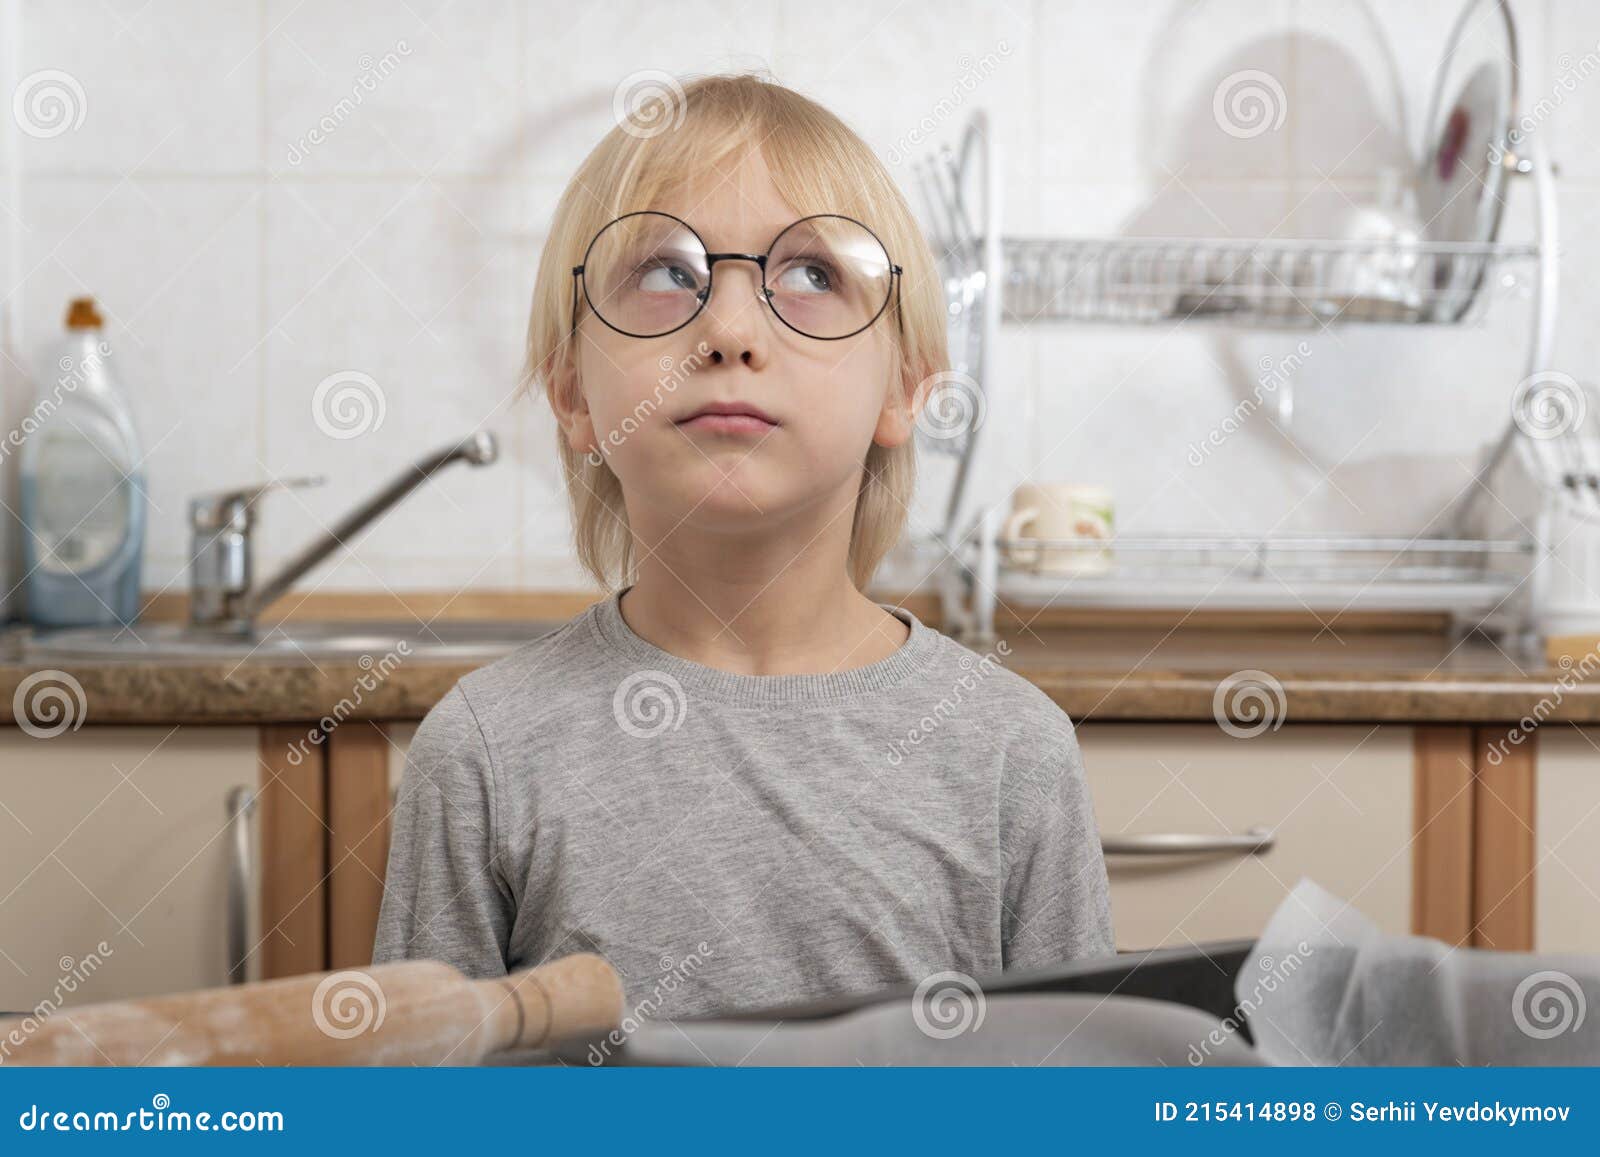 Blonde Boy with Glasses - wide 4